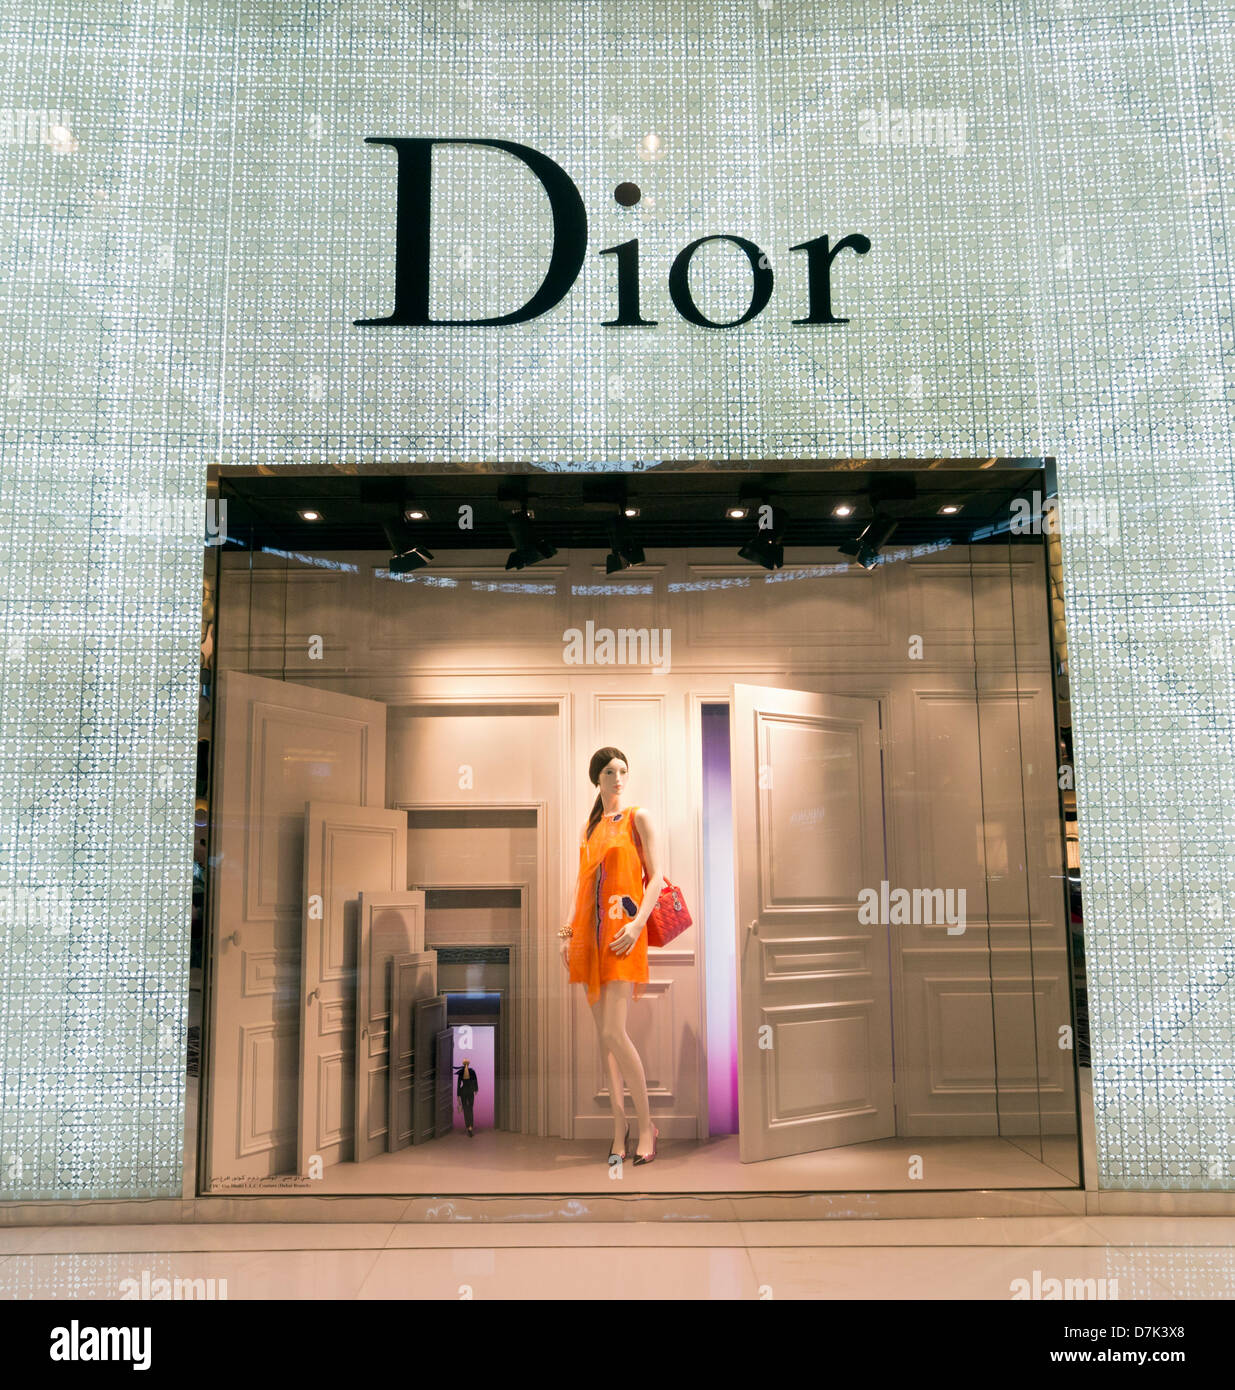 30 Dior Haute Couture Stock Photos Pictures  RoyaltyFree Images   iStock  Dior runway